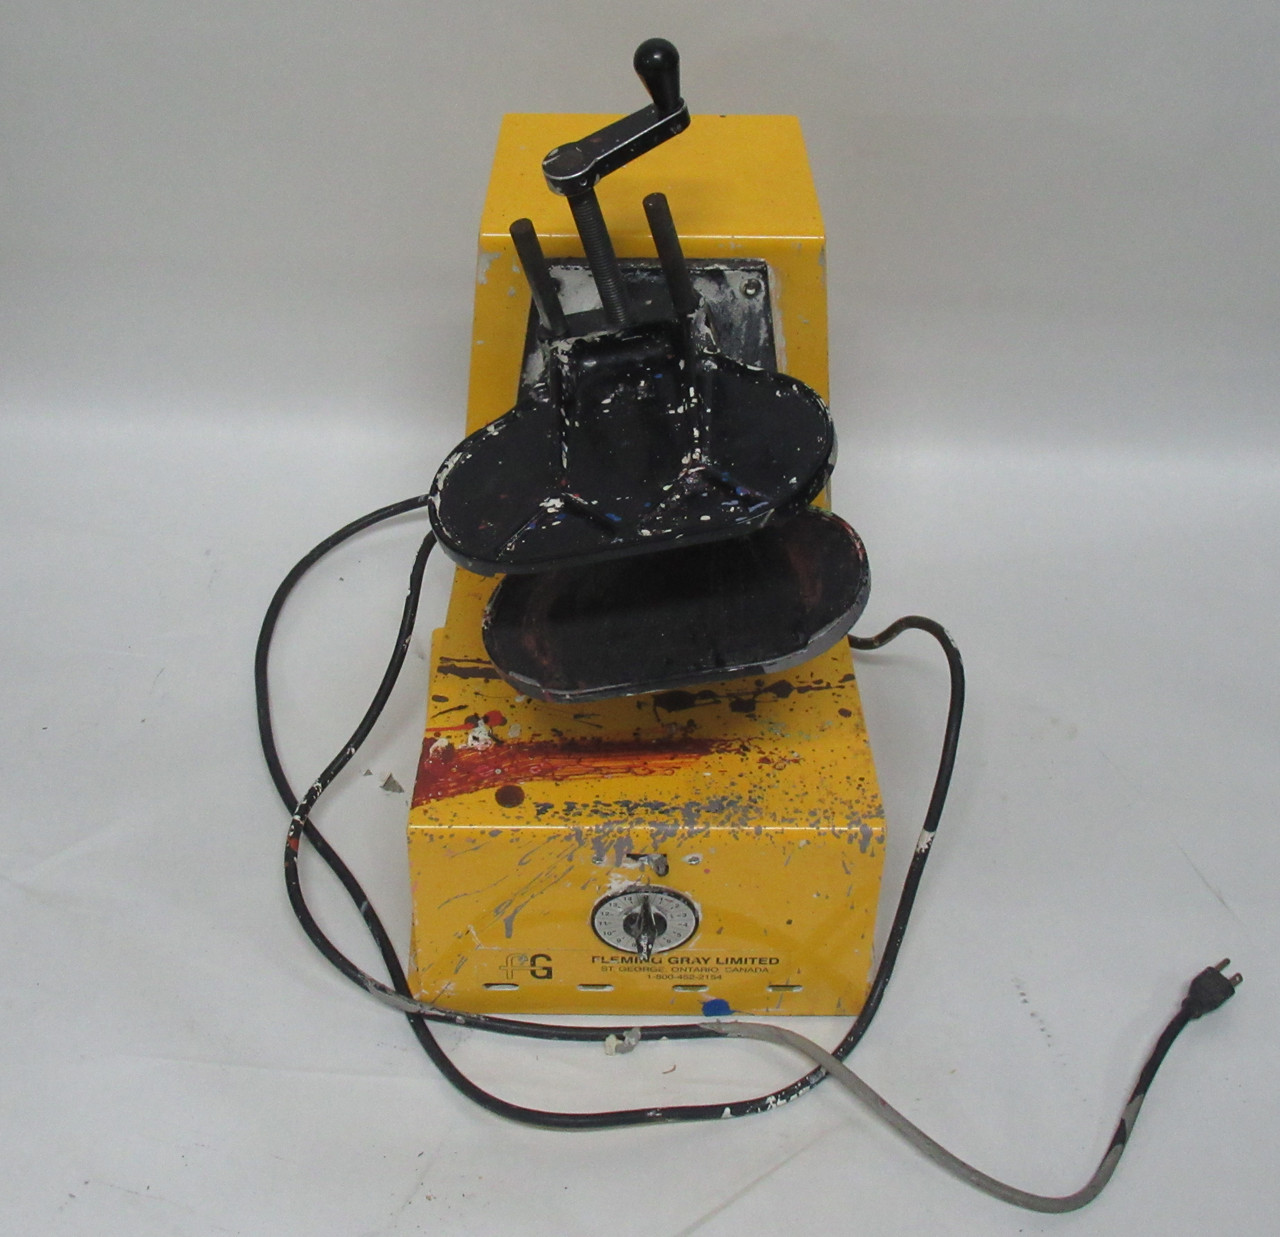 Fleming Gray C1 Paint Shaker 230/110V 50/60Hz 1/4Hp Switch & Timer NO PADS USED